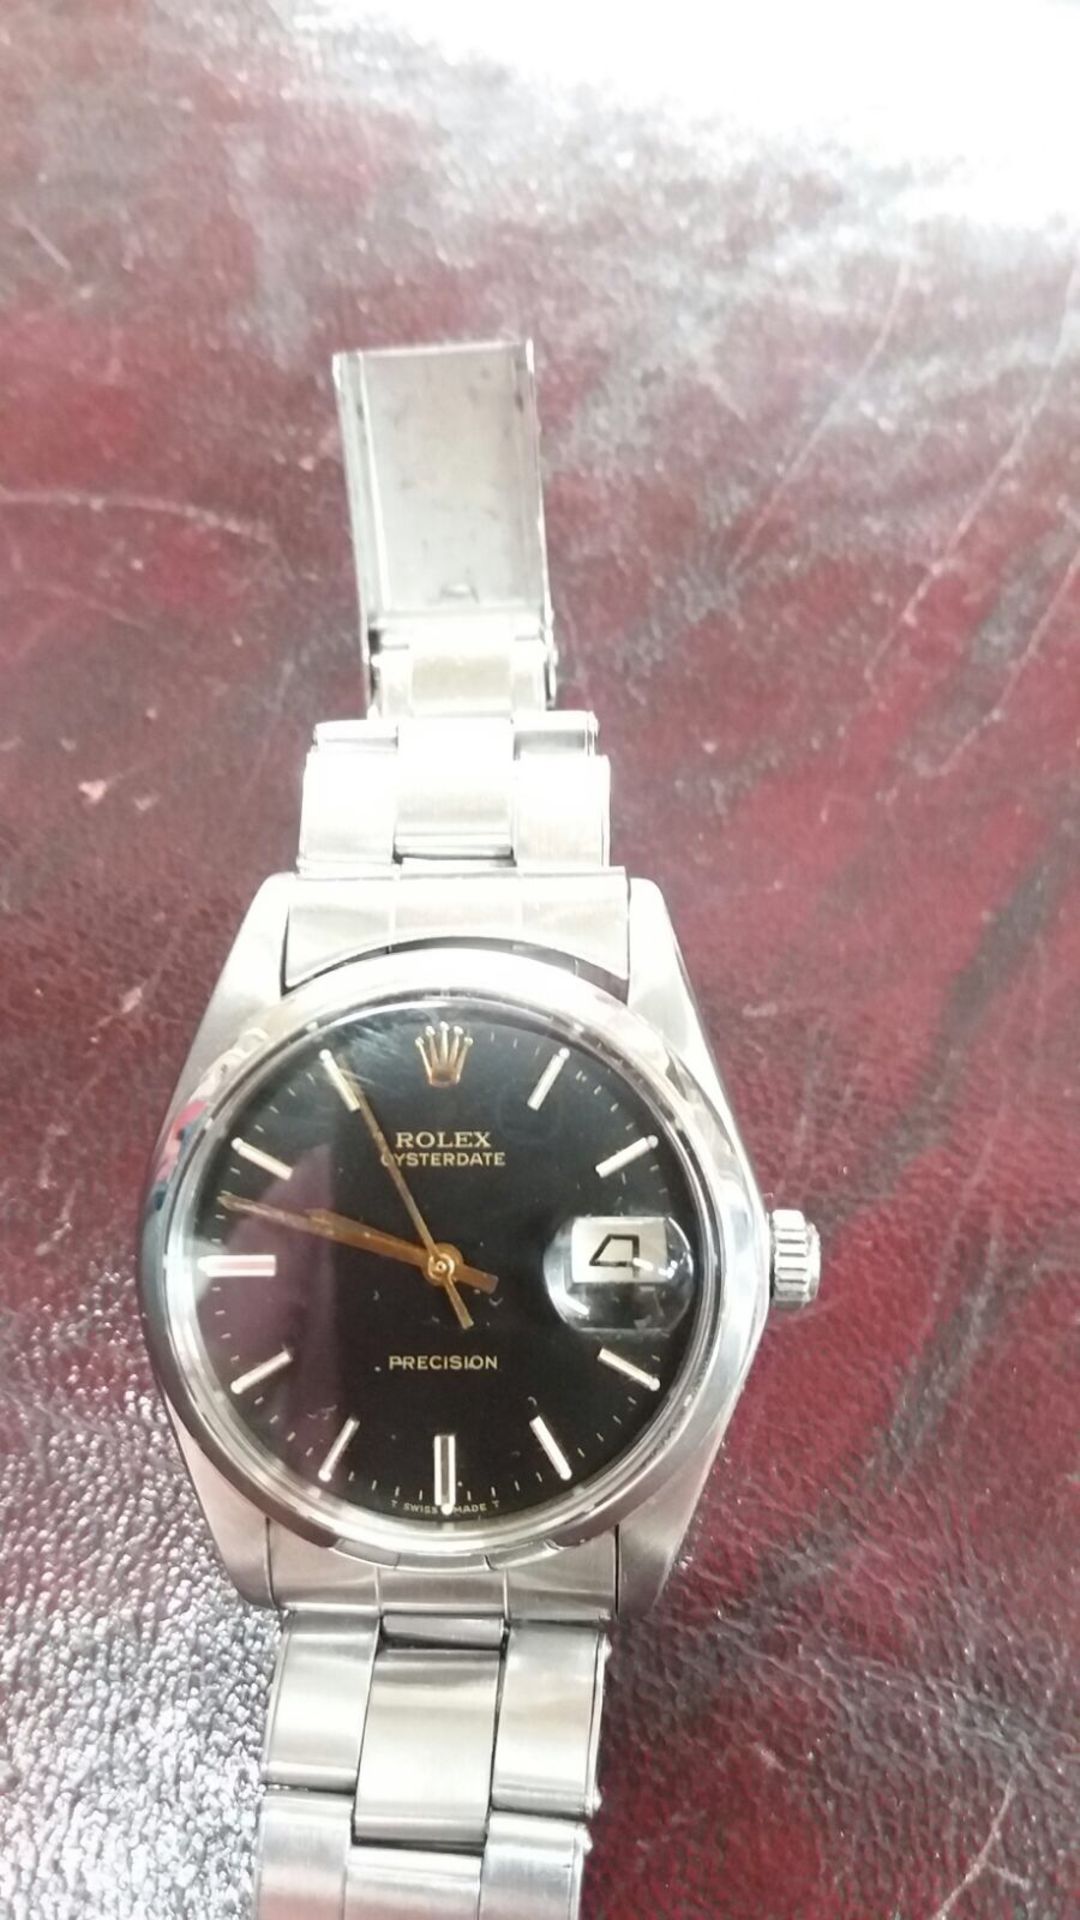 1973 Rolex OysterDate Precision - cal 6694, Fully Serviced. - Image 2 of 9